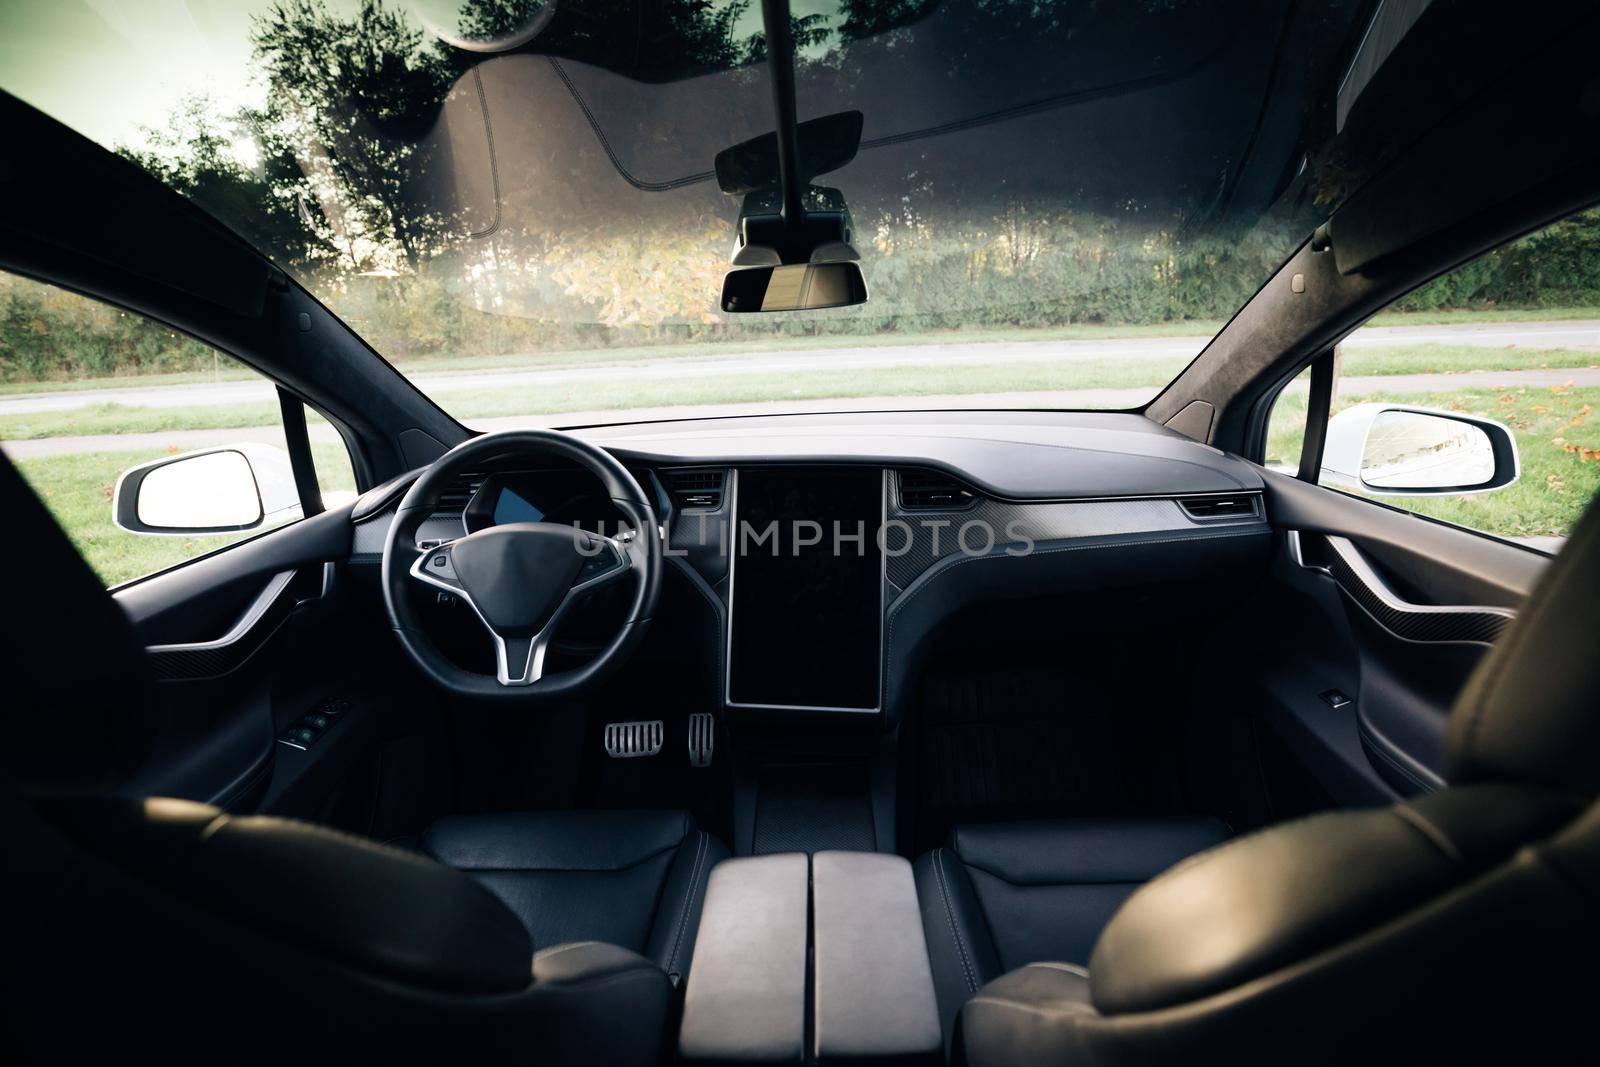 Electric car interior details of door handle with windows controls and adjustments. Inside car interior with front seats, driver and passenger textile windows door panels console by uflypro